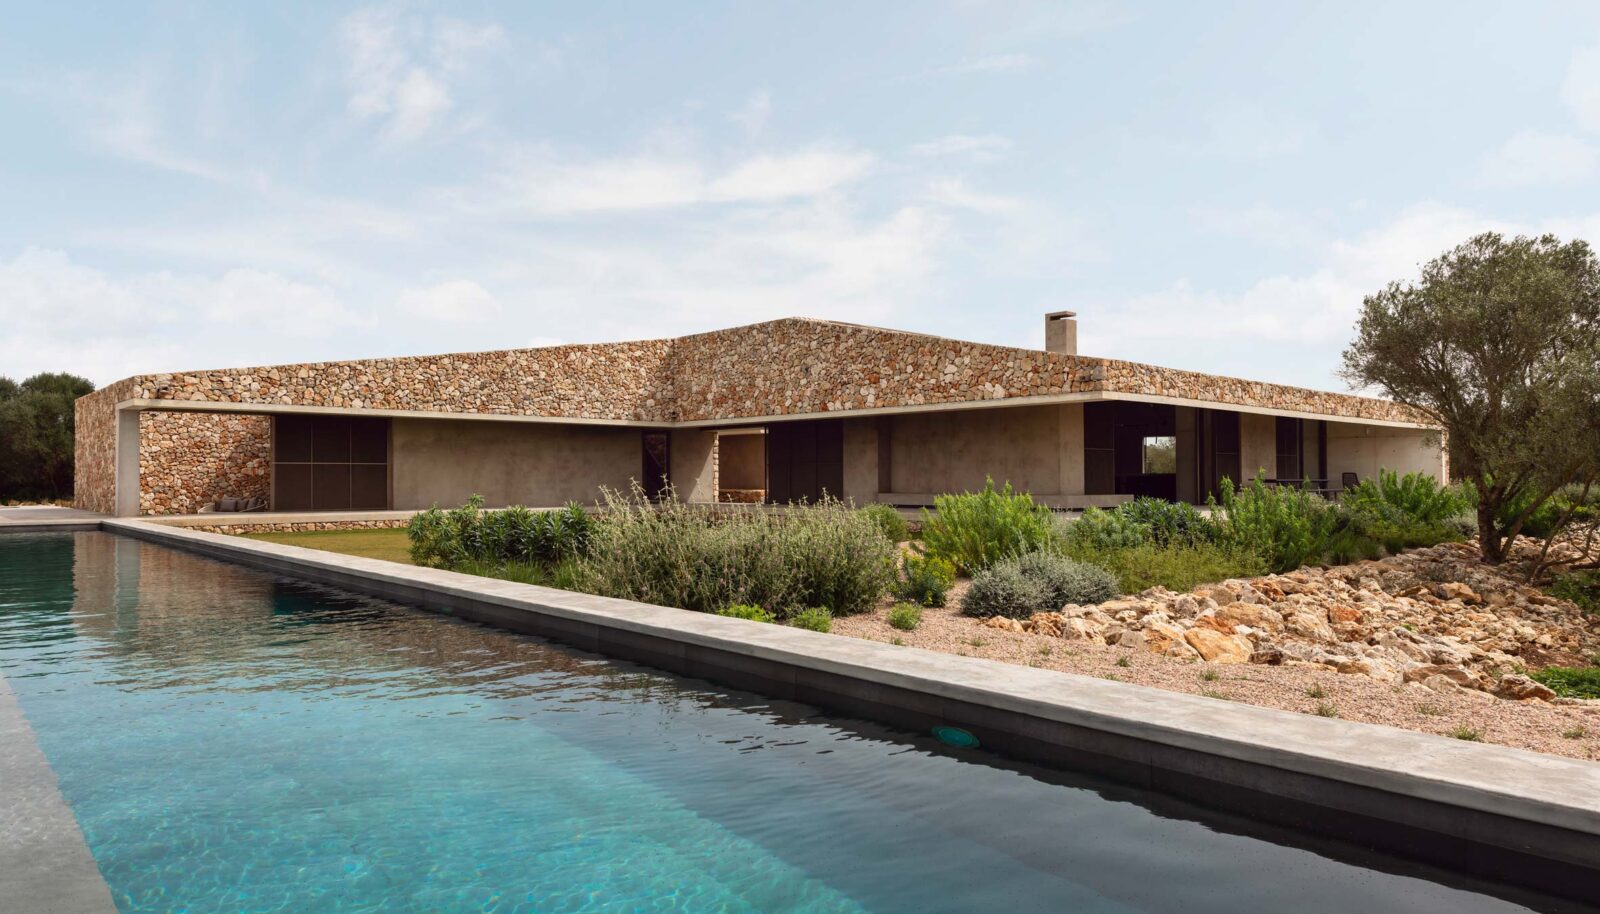 A SUSTAINABLE BUILDING IN MALLORCA GEARED TOWARDS WELL-BEING